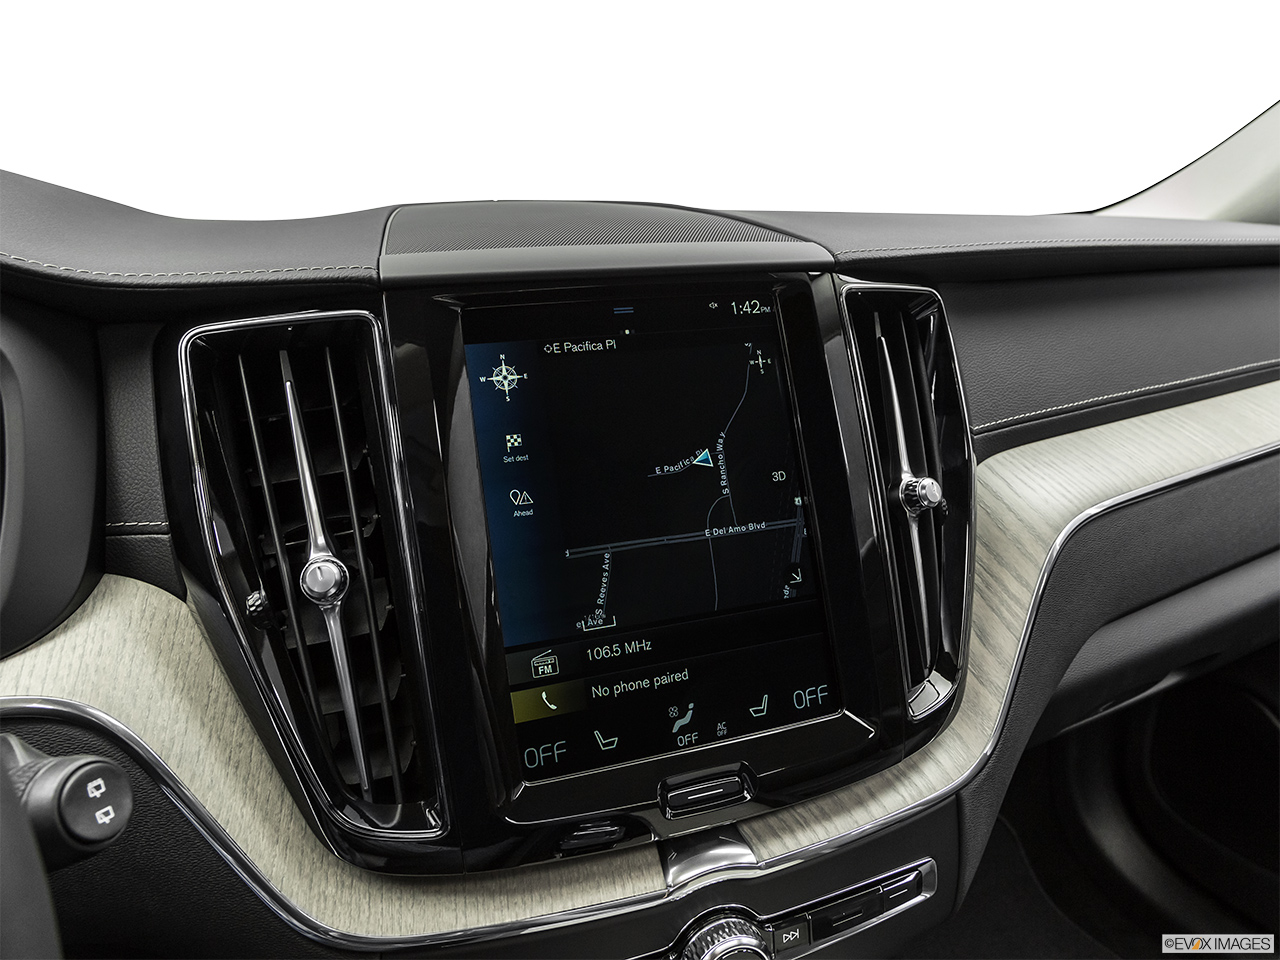 2019 Volvo XC60 T8 Inscription eAWD Plug-in Hybrid Driver position view of navigation system. 